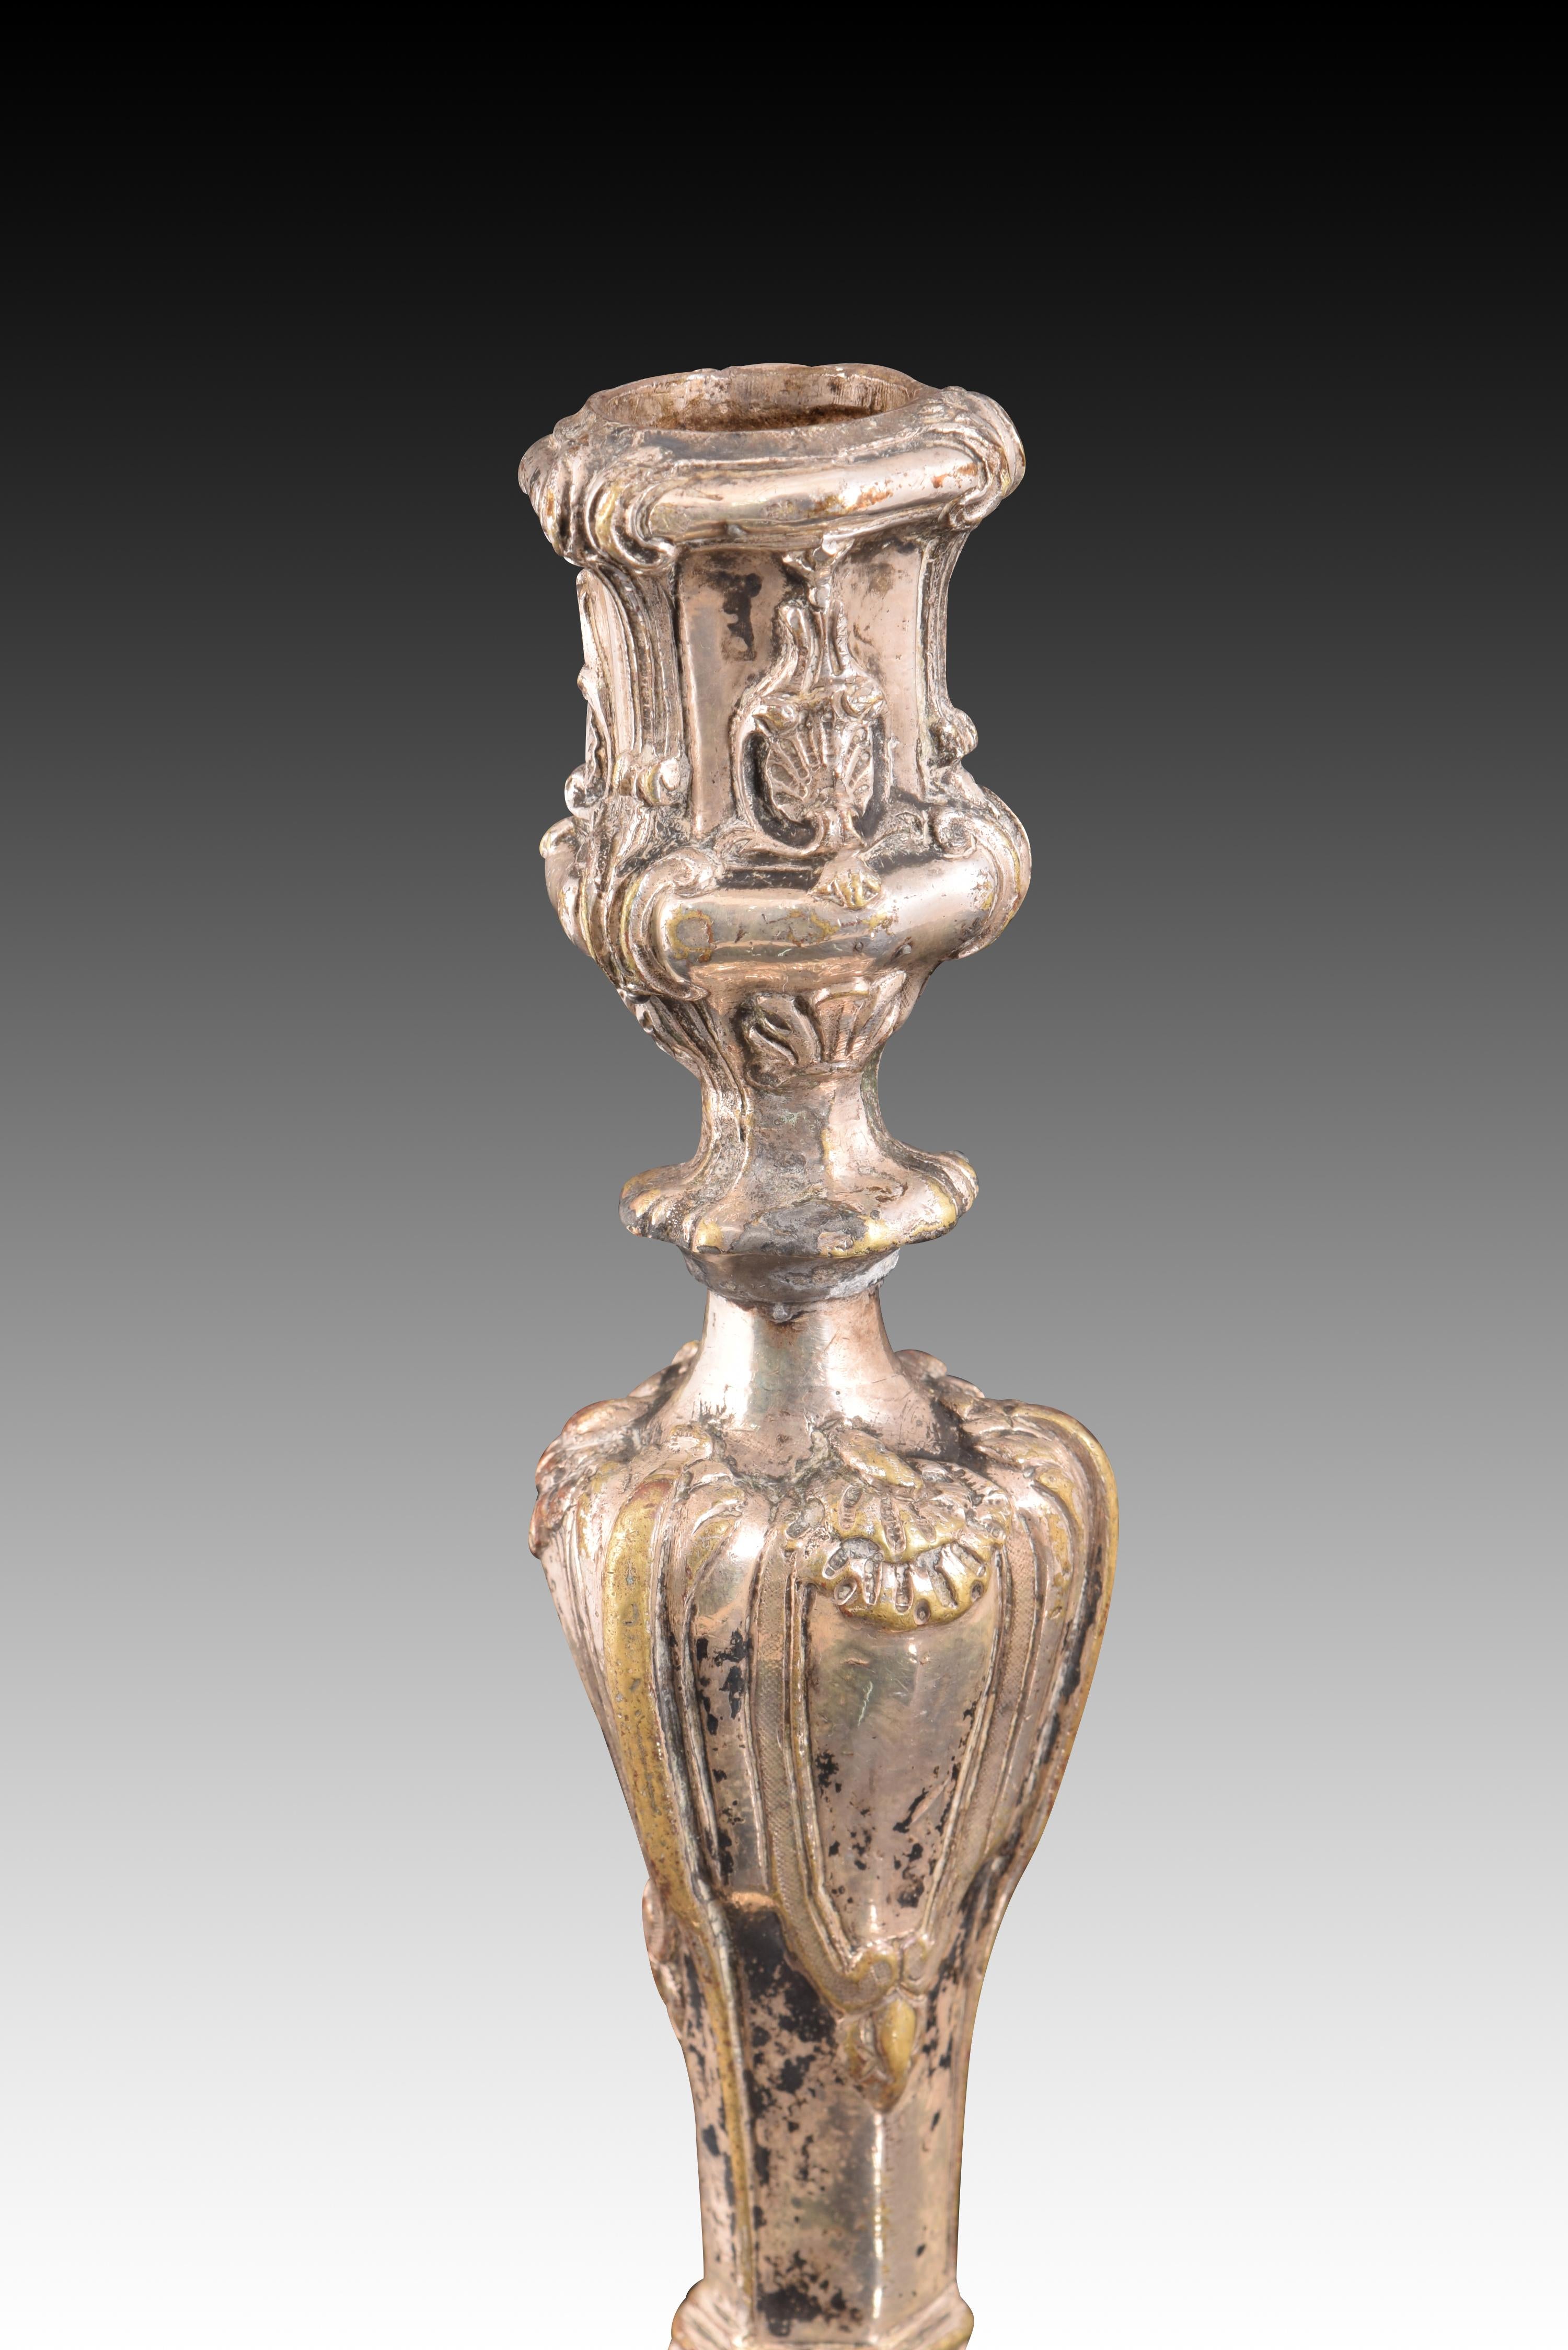 19th Century Candlestick or candle holder. Bronze. 19th century. For Sale